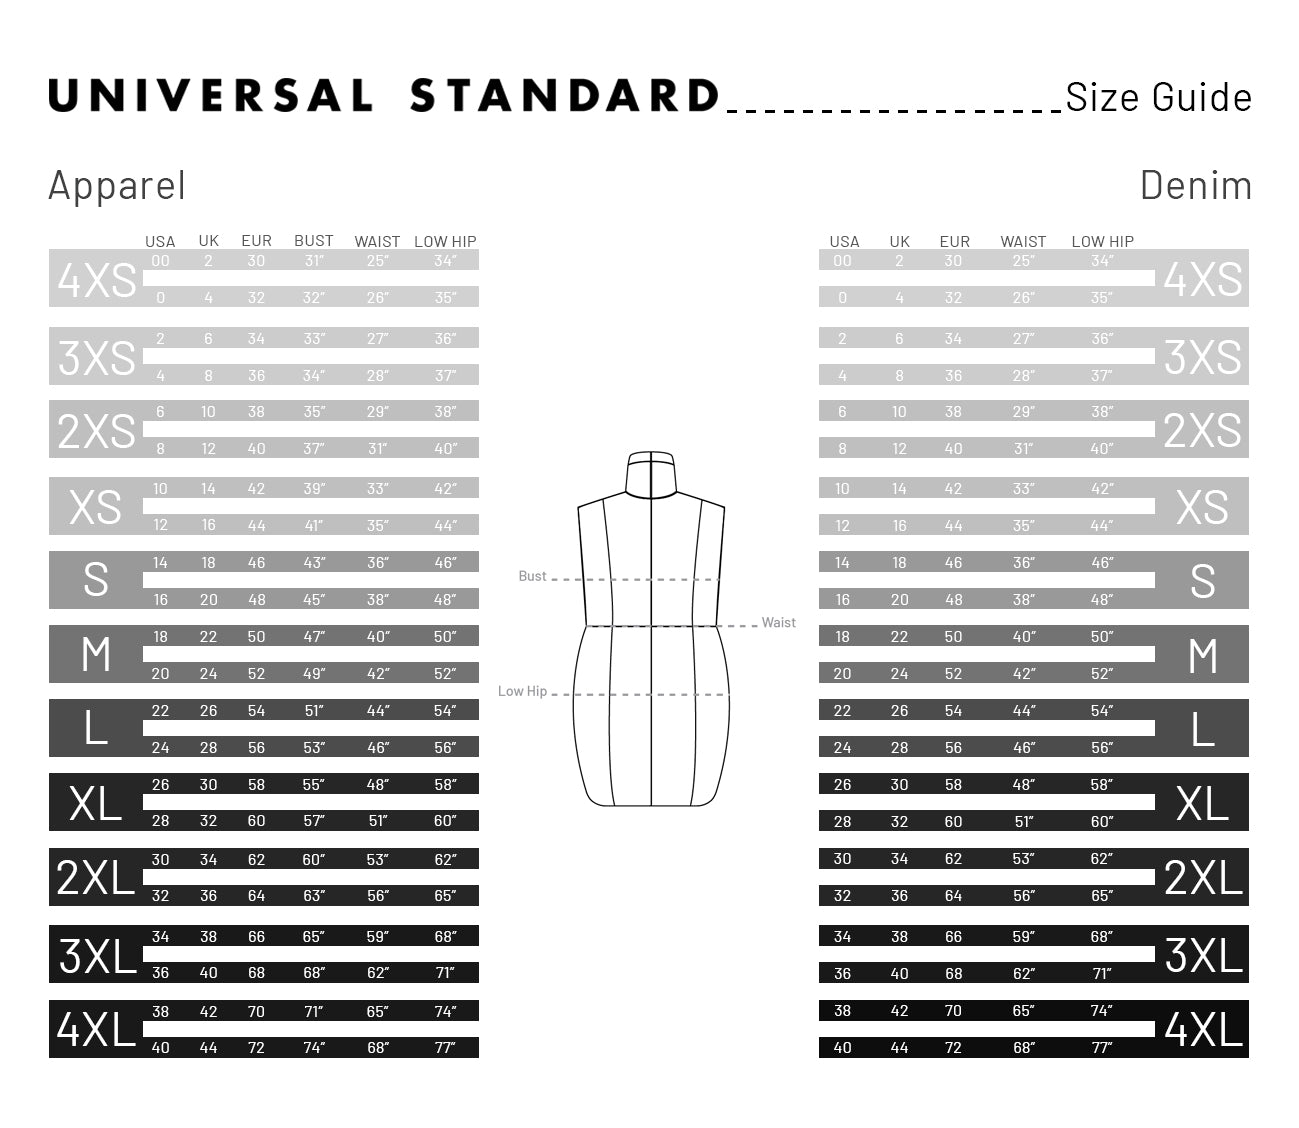 size-guides-universal-standard